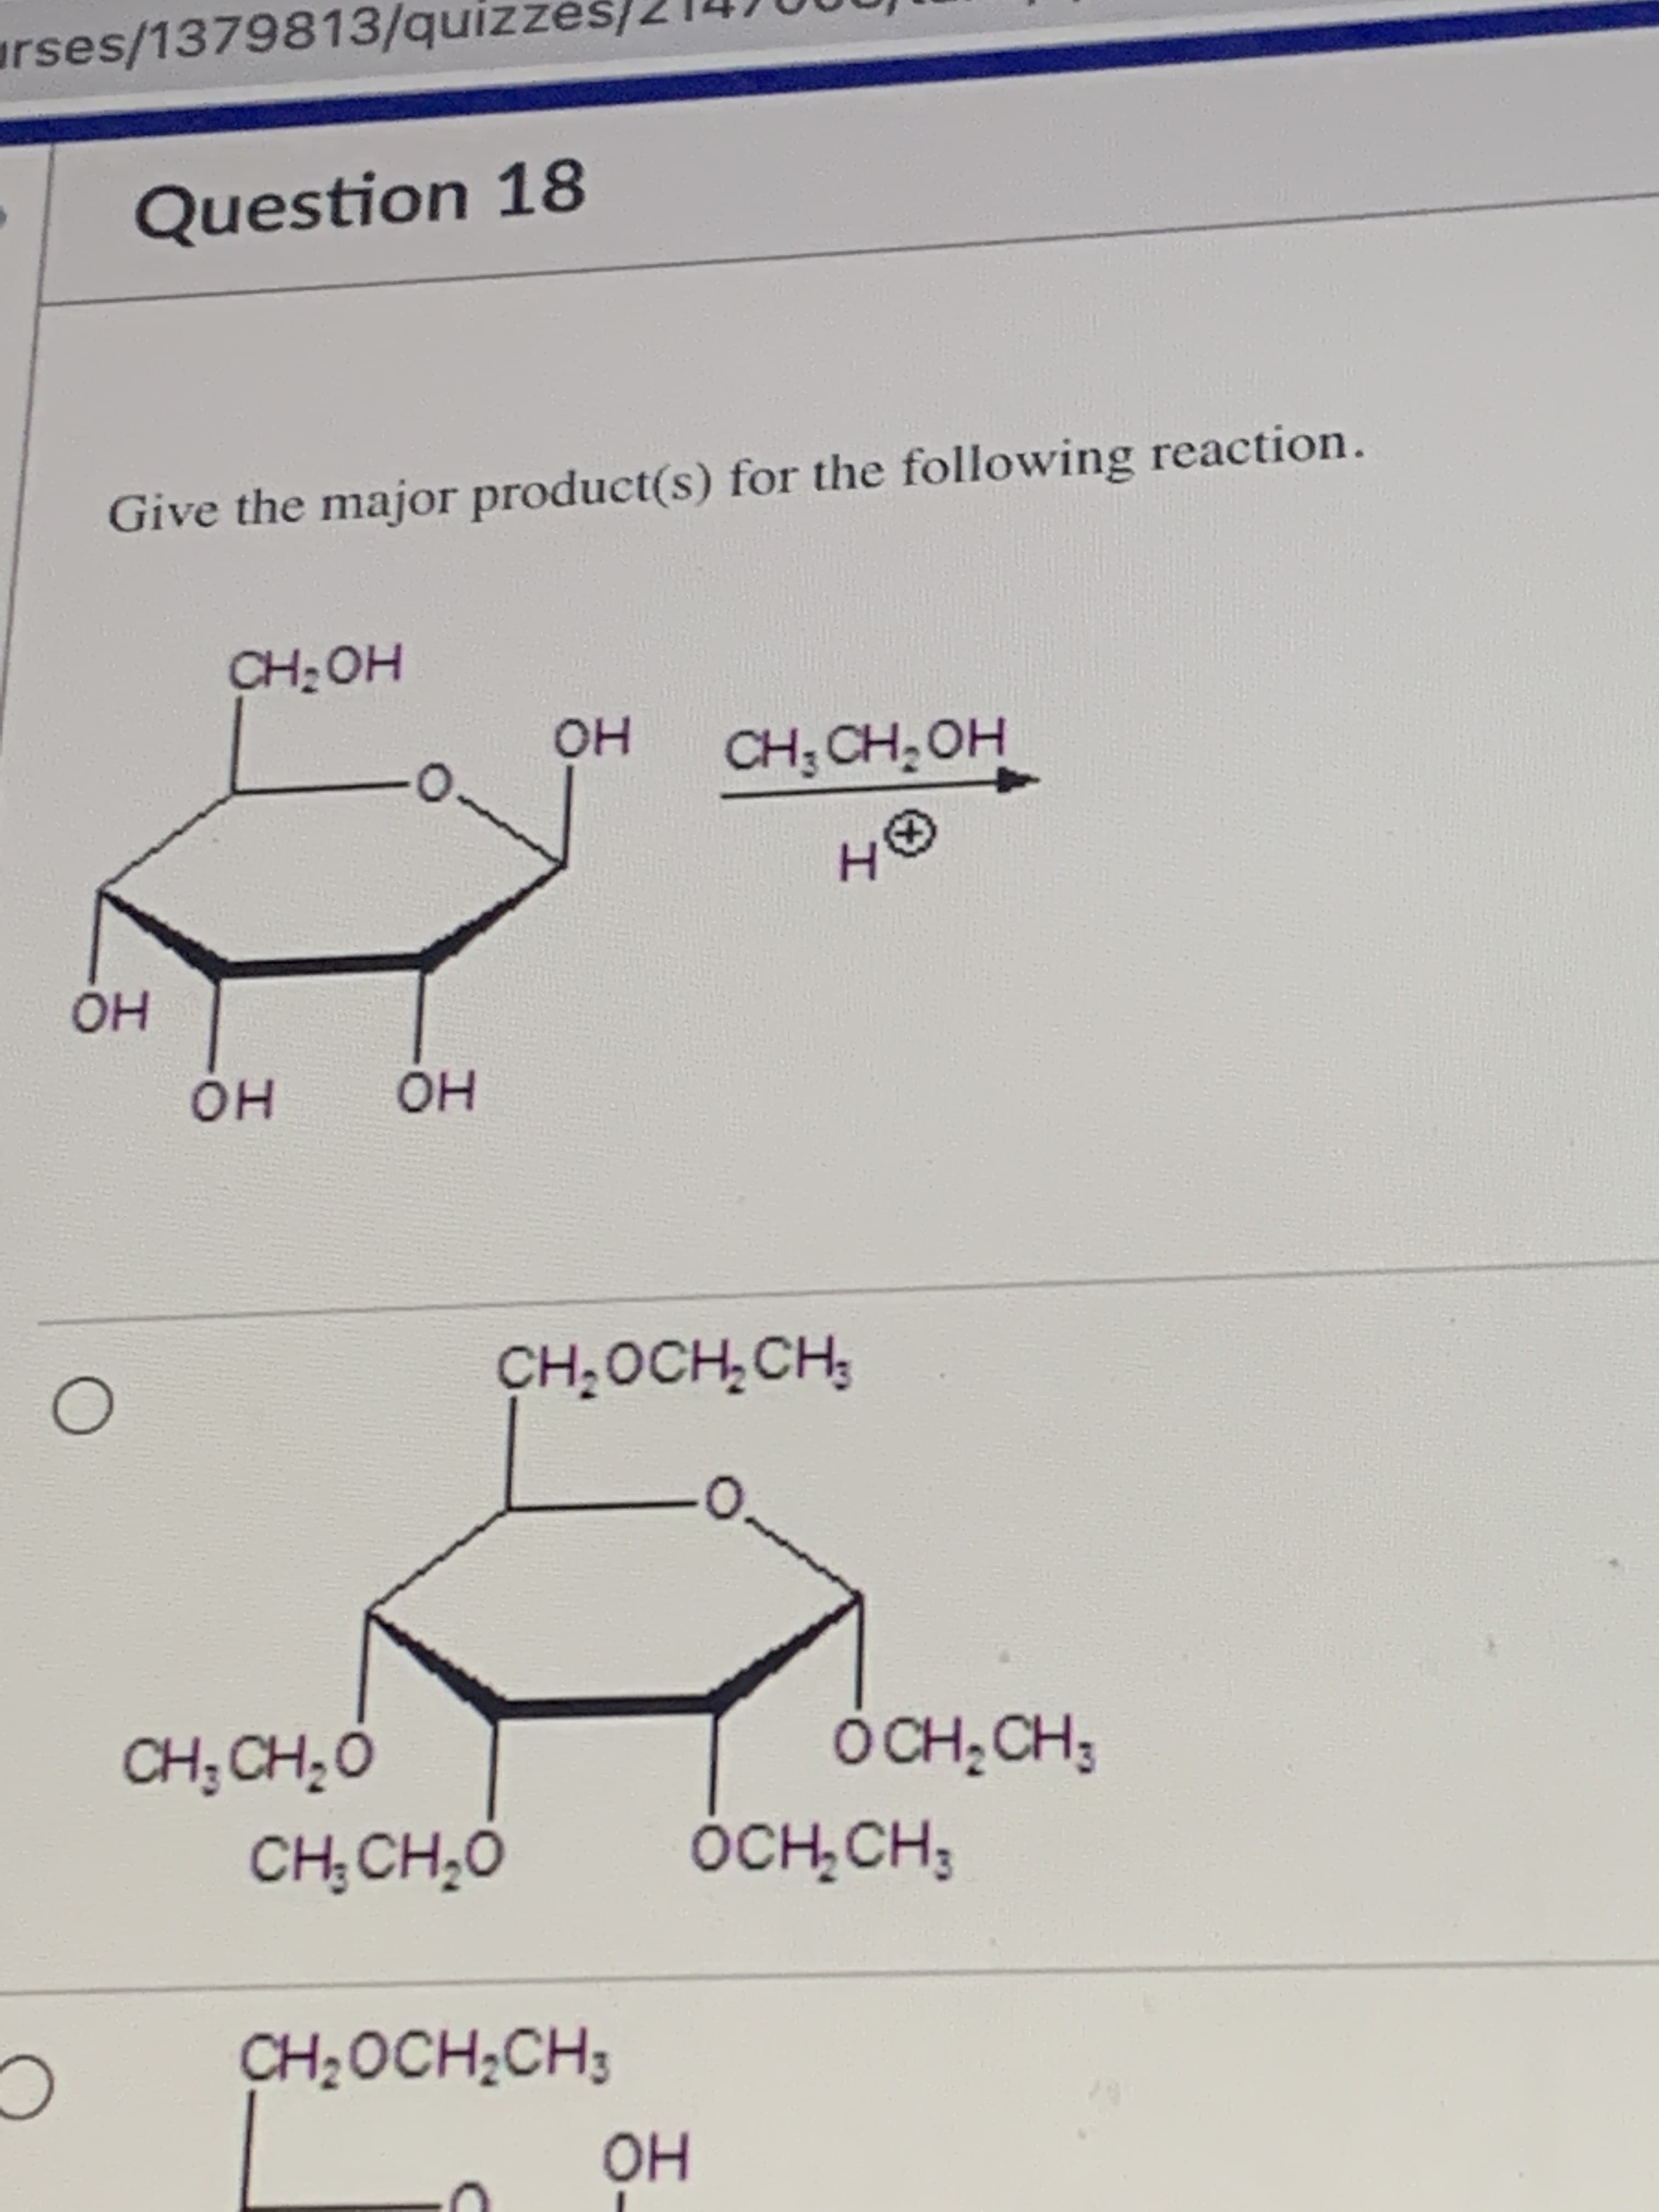 Give the major product(s) for the following reaction.
CH2OH
он
0-
CH; CH,OH
он
он
он
